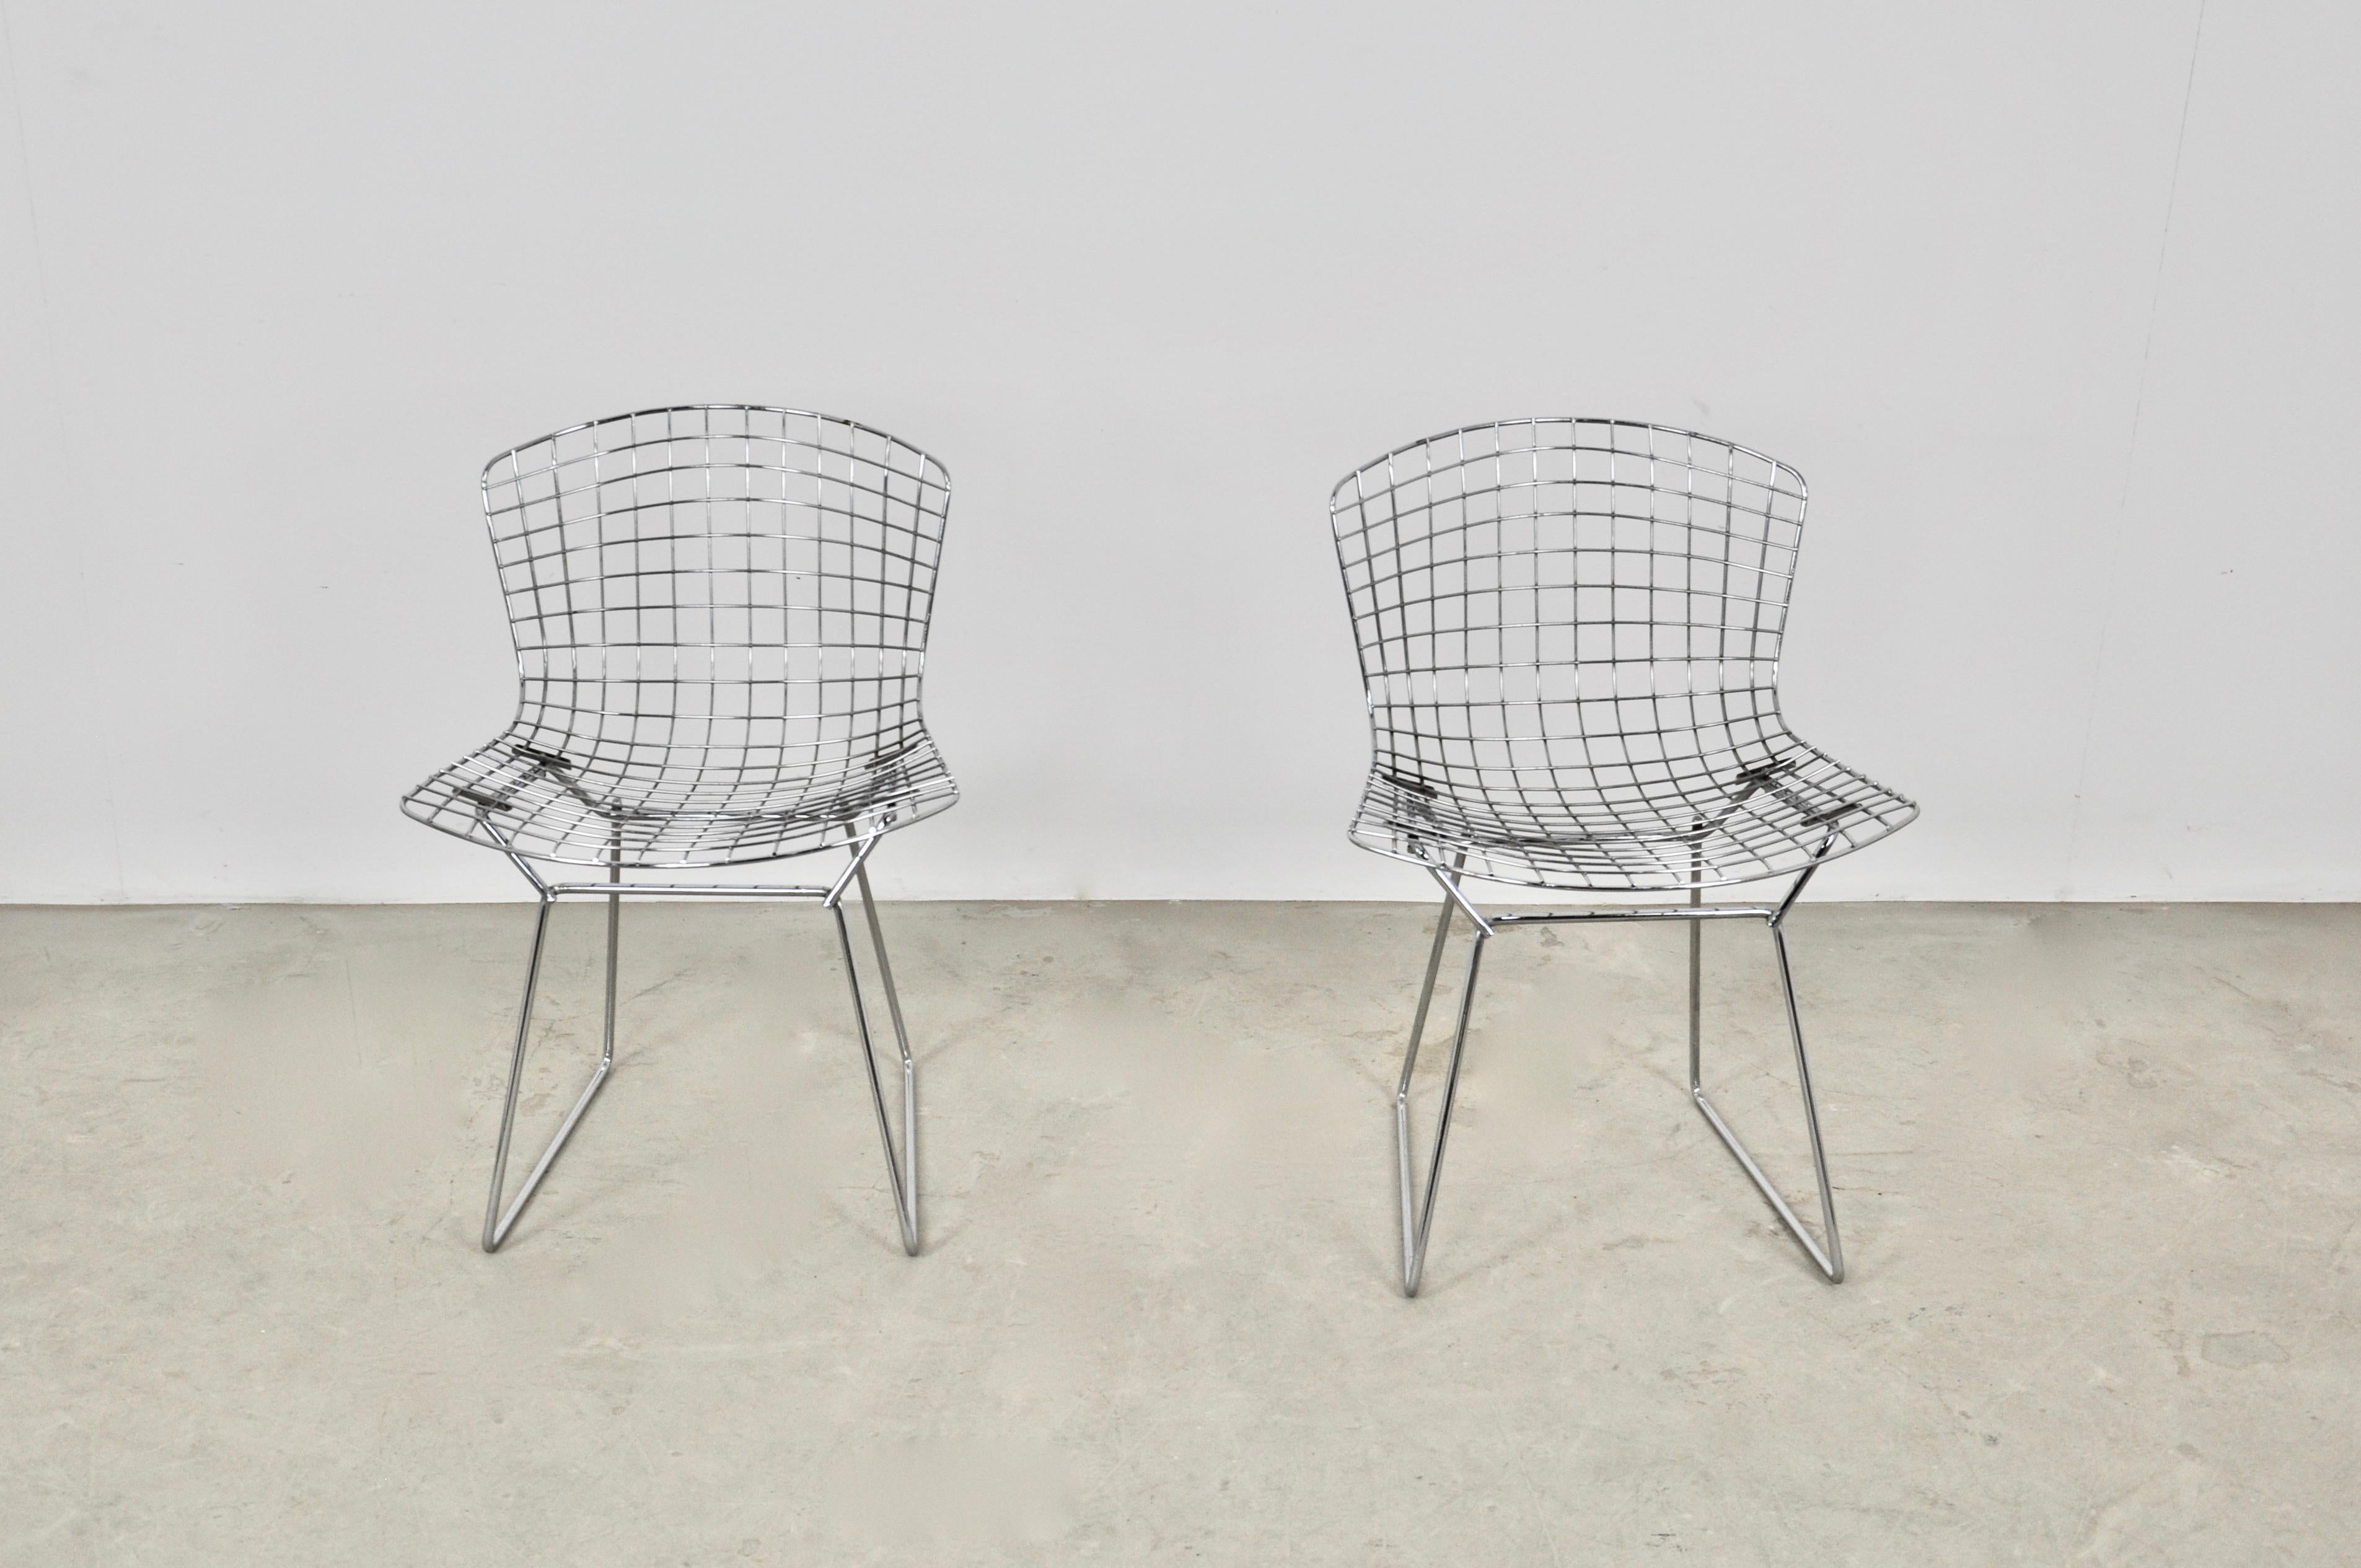 Pair of chairs in chromed metal. Measure: Seat height 46cm. Wear due to time and age of chairs (see photos).